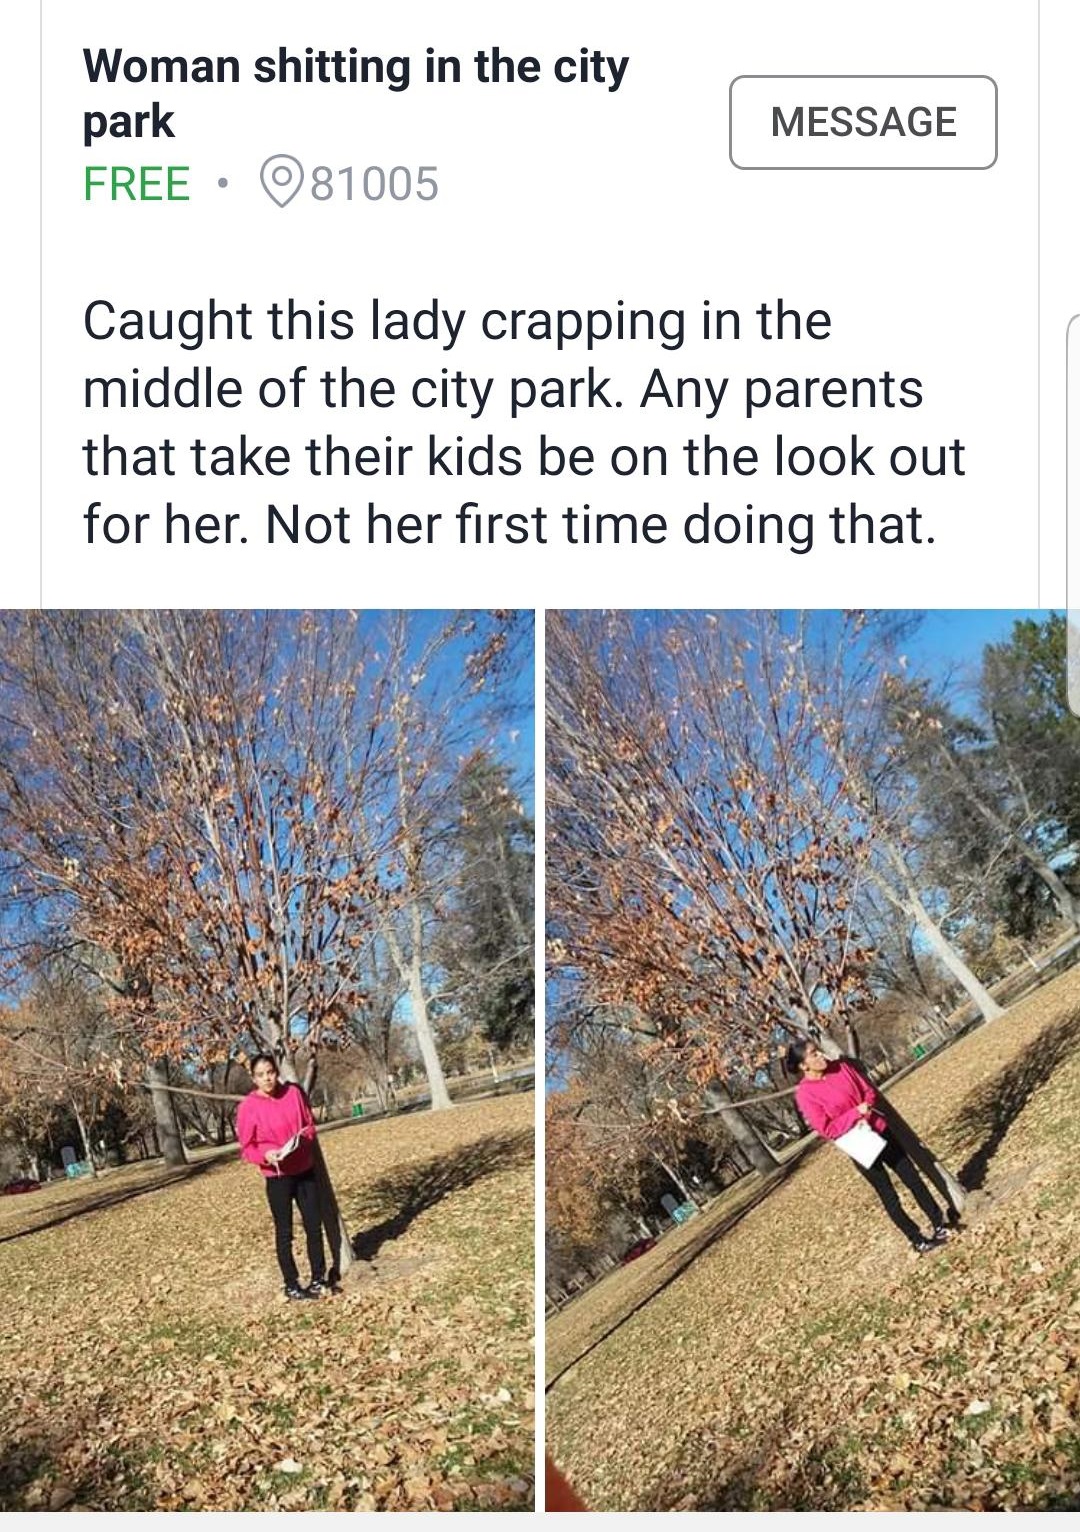 tree - Woman shitting in the city park Free. 81005 Message Caught this lady crapping in the middle of the city park. Any parents that take their kids be on the look out for her. Not her first time doing that.